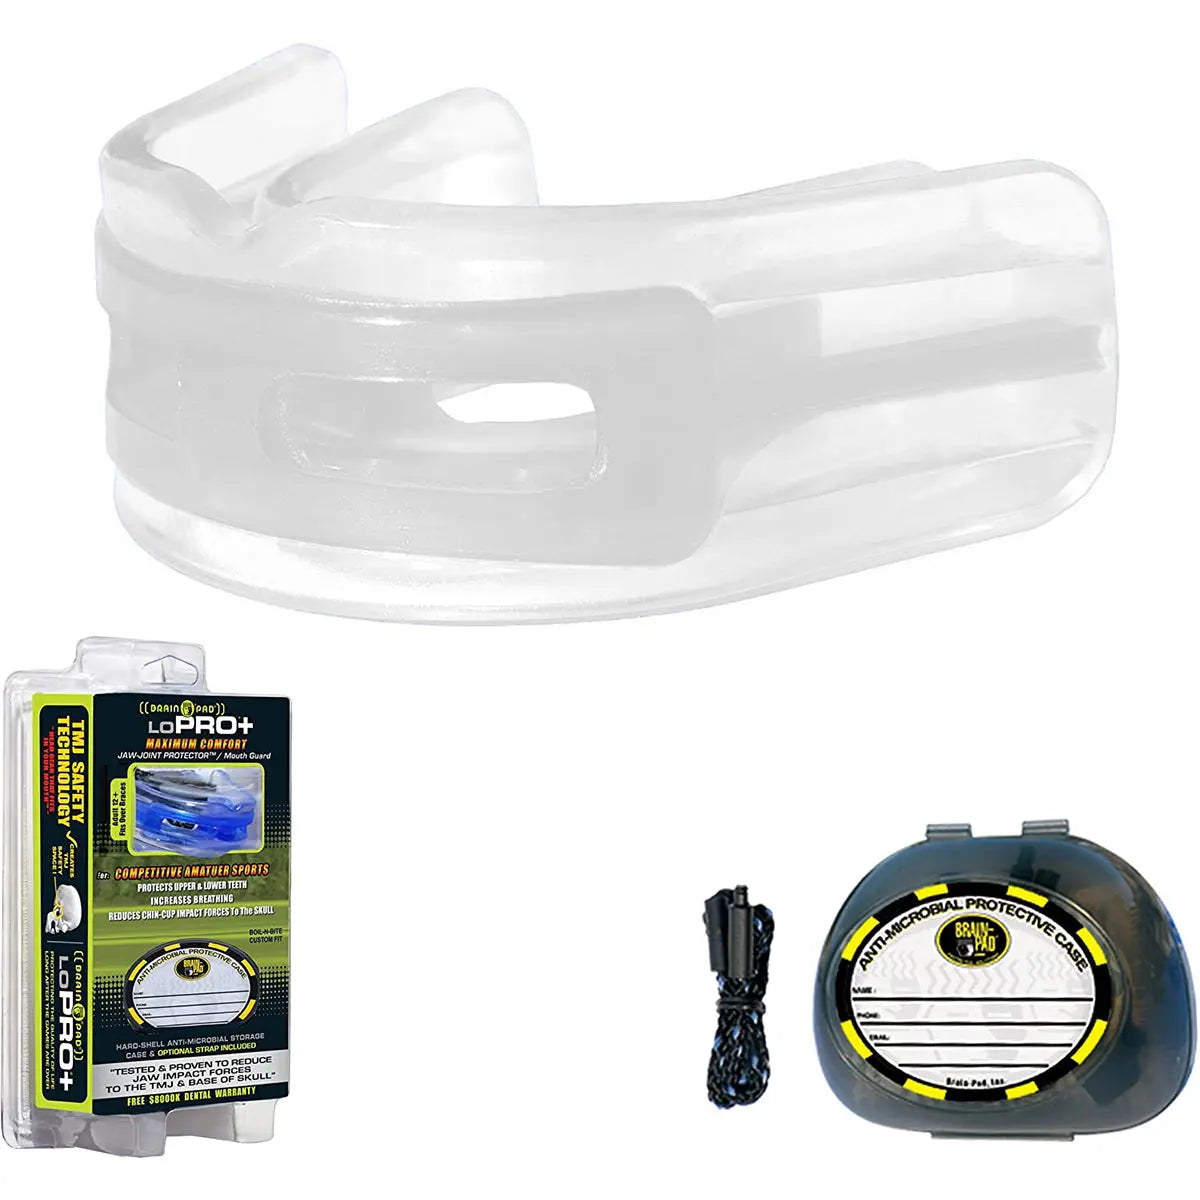 Brain Pad Double Guard Strapless Mouthguard - Clear Brain Pad